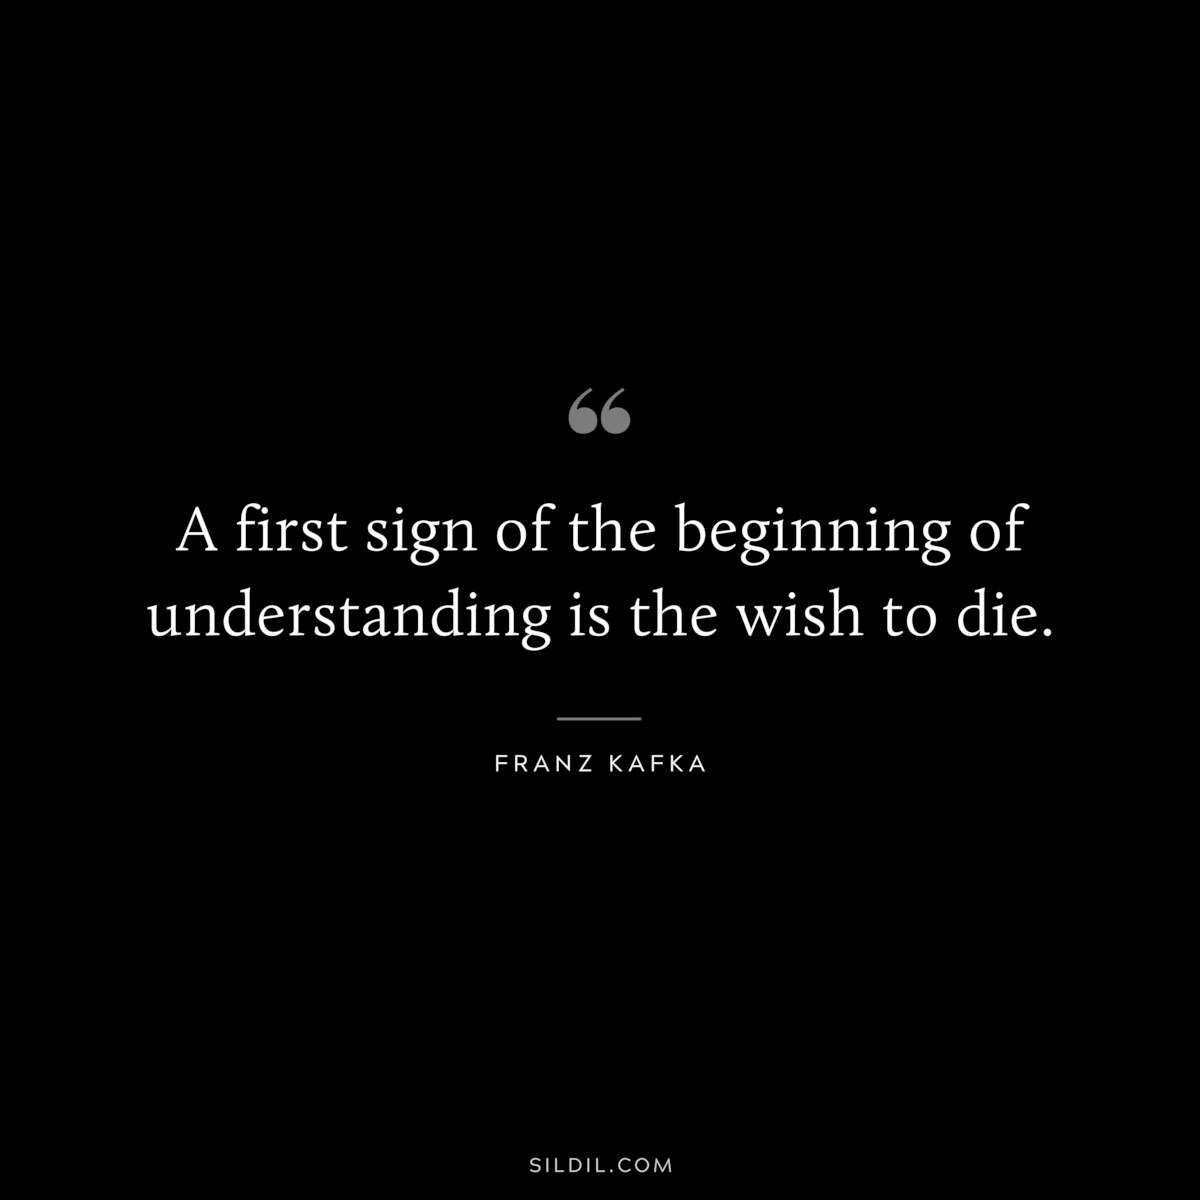 A first sign of the beginning of understanding is the wish to die. ― Franz Kafka